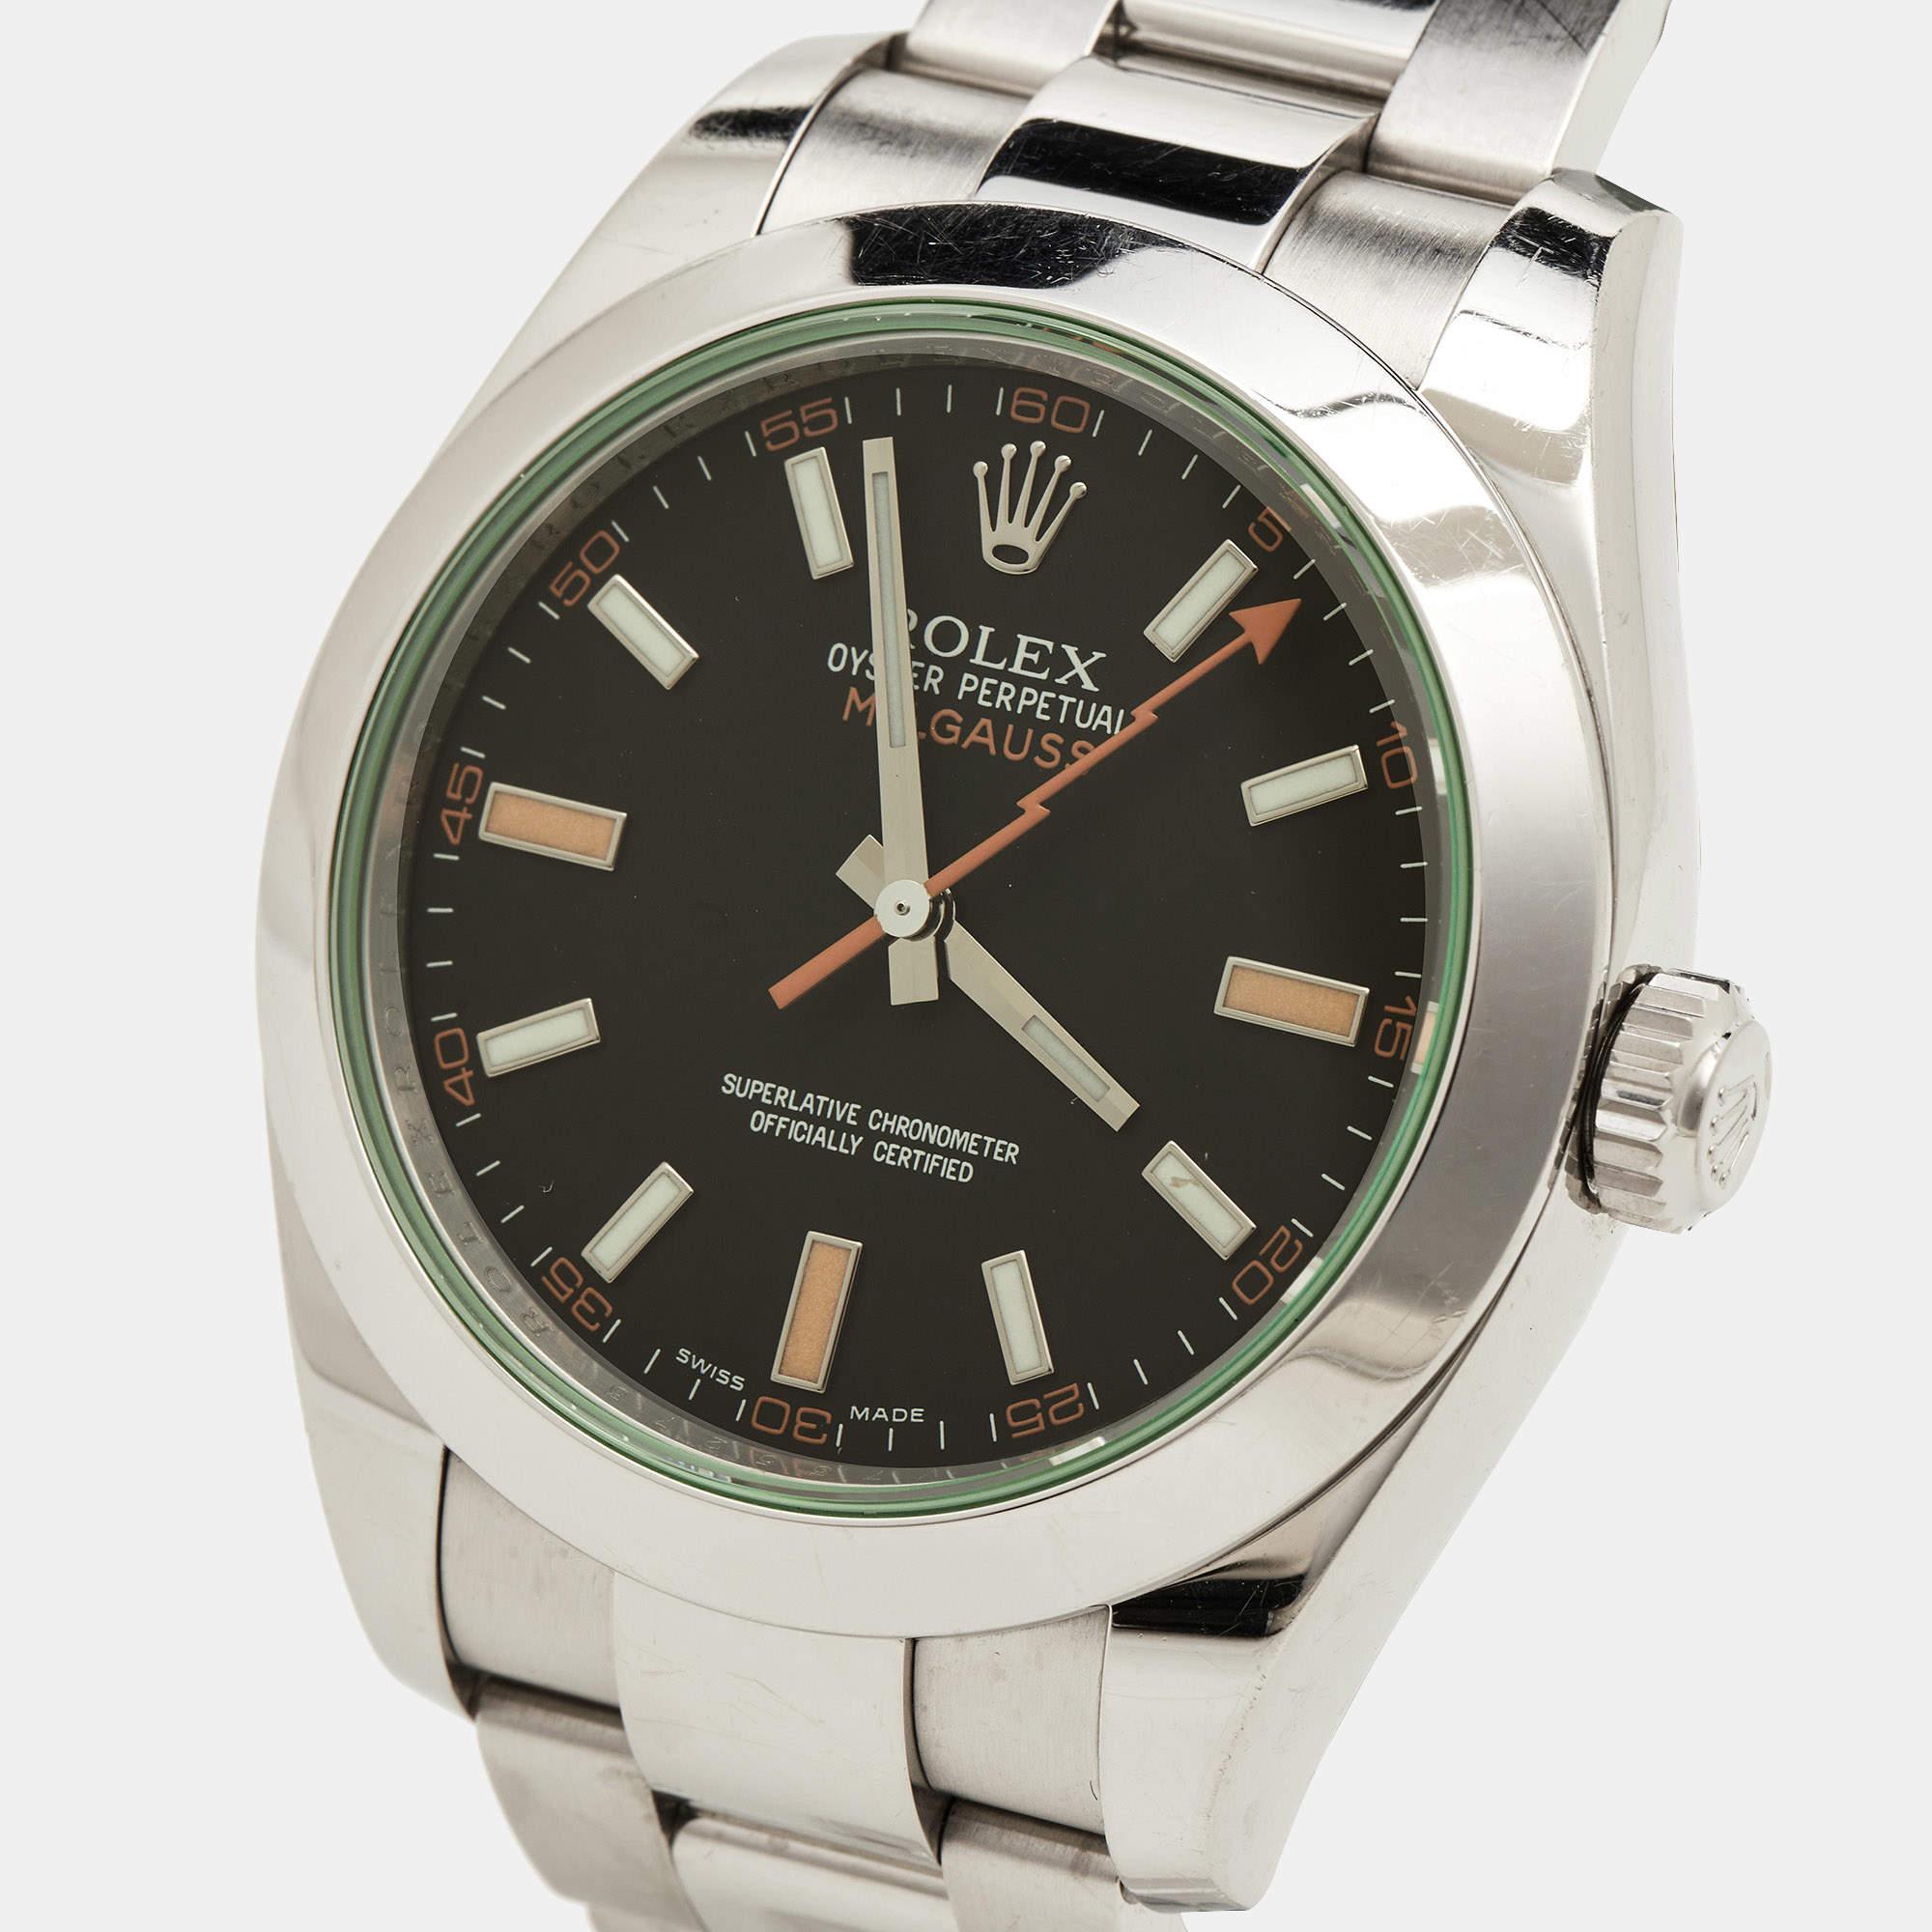 With the unique green sapphire crystal, an orange lightning-bolt-shaped seconds hand, and an overall clean aesthetic, there's no mistaking the Milgauss for anything else. This Rolex watch was first designed in 1956 as a solution for engineers and